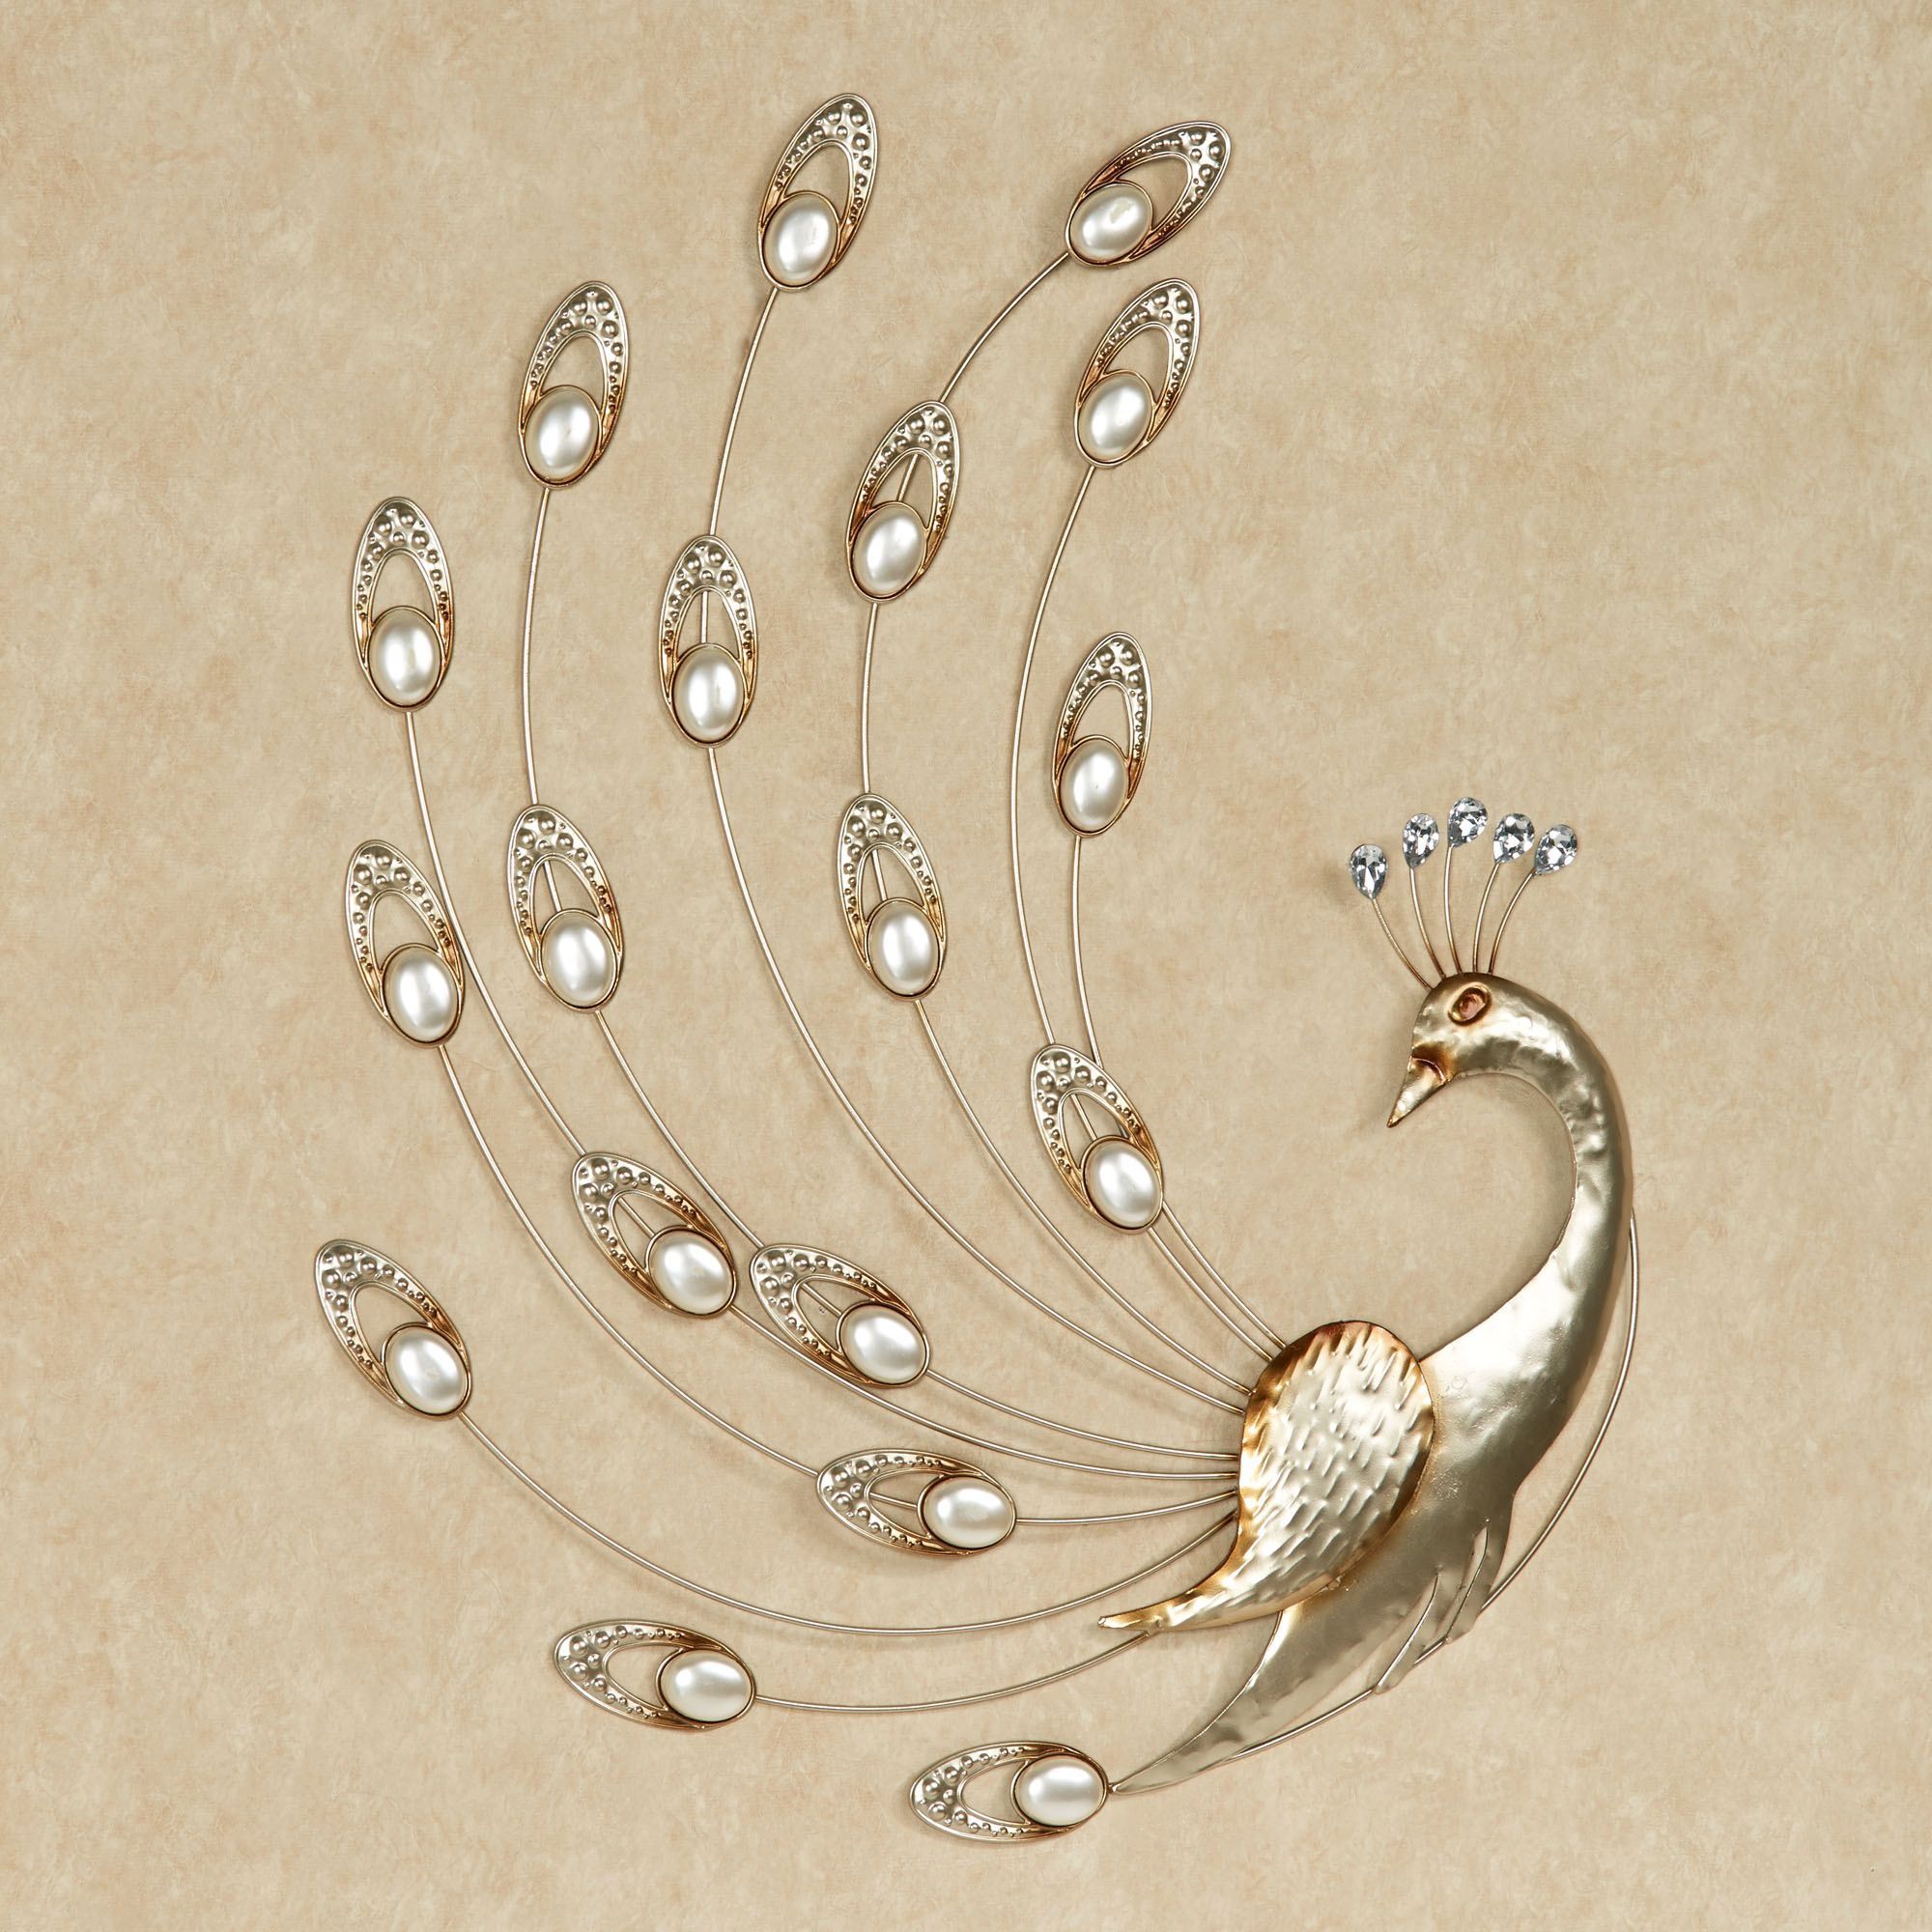 Julietta Pearl Peacock Metal Wall Art Within Best And Newest Gold And White Metal Wall Art (View 8 of 20)